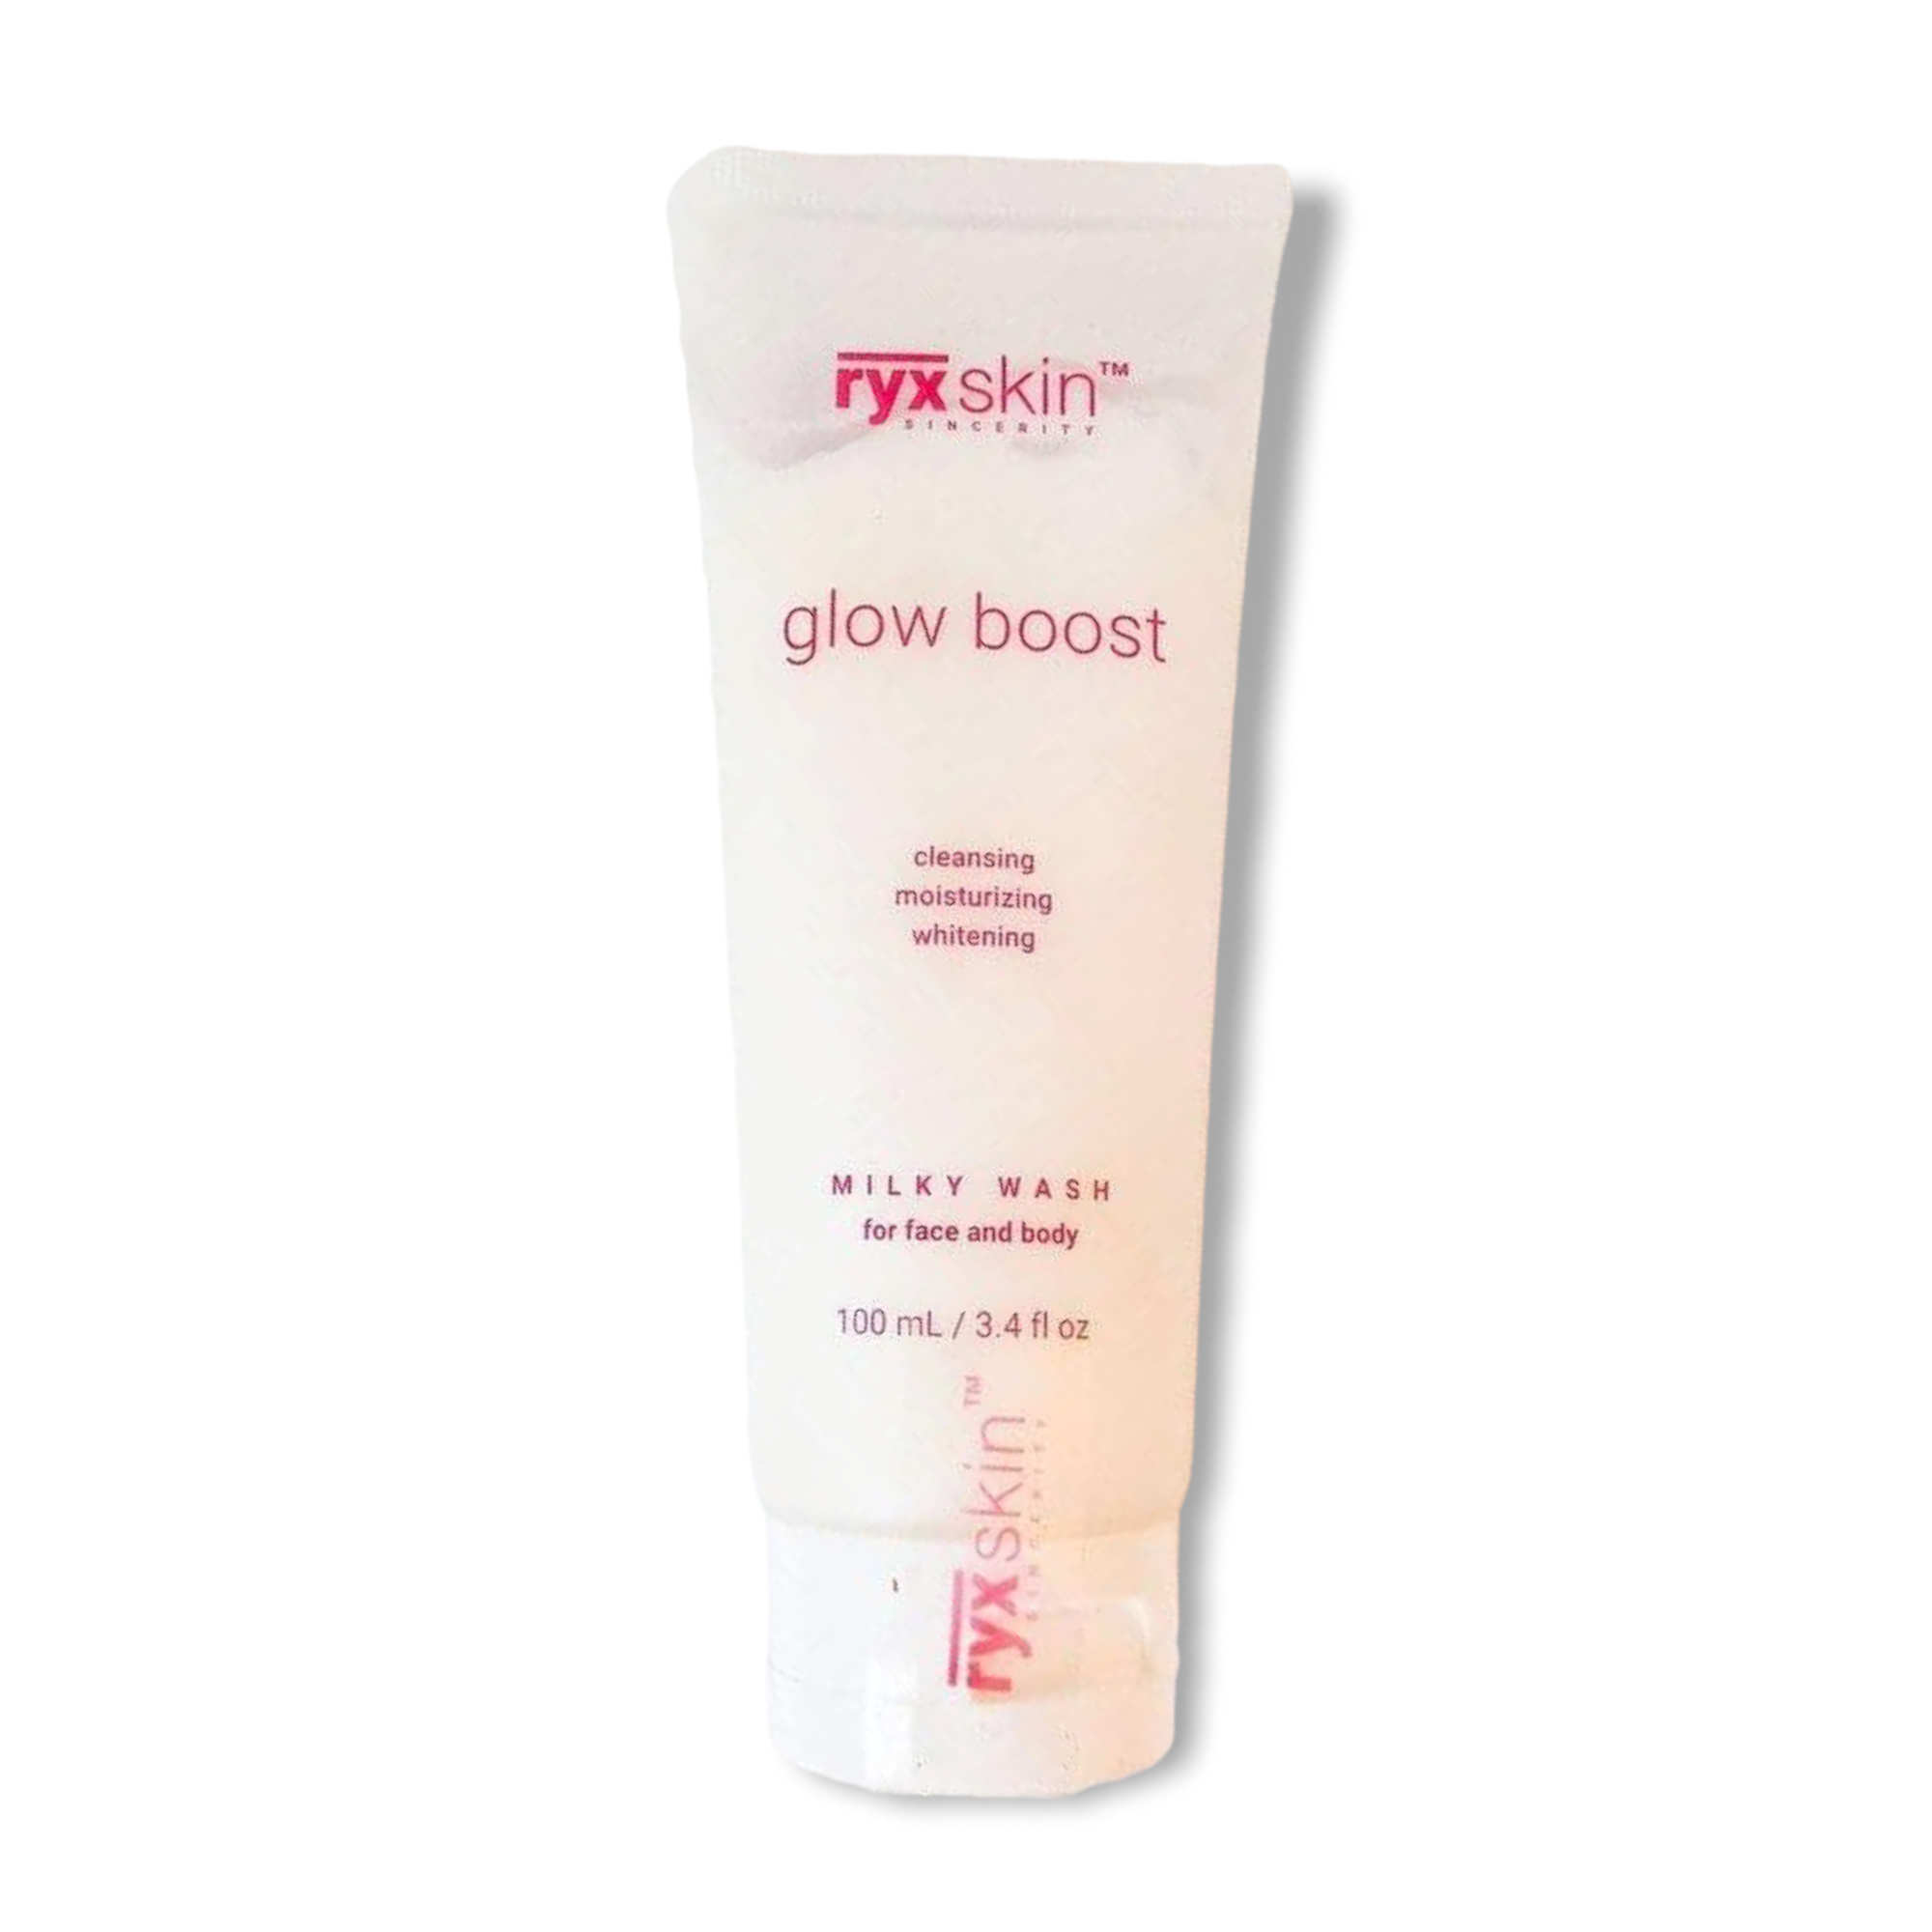 RyxSkin Glow Boost Milky Wash For Face and Body 100ml